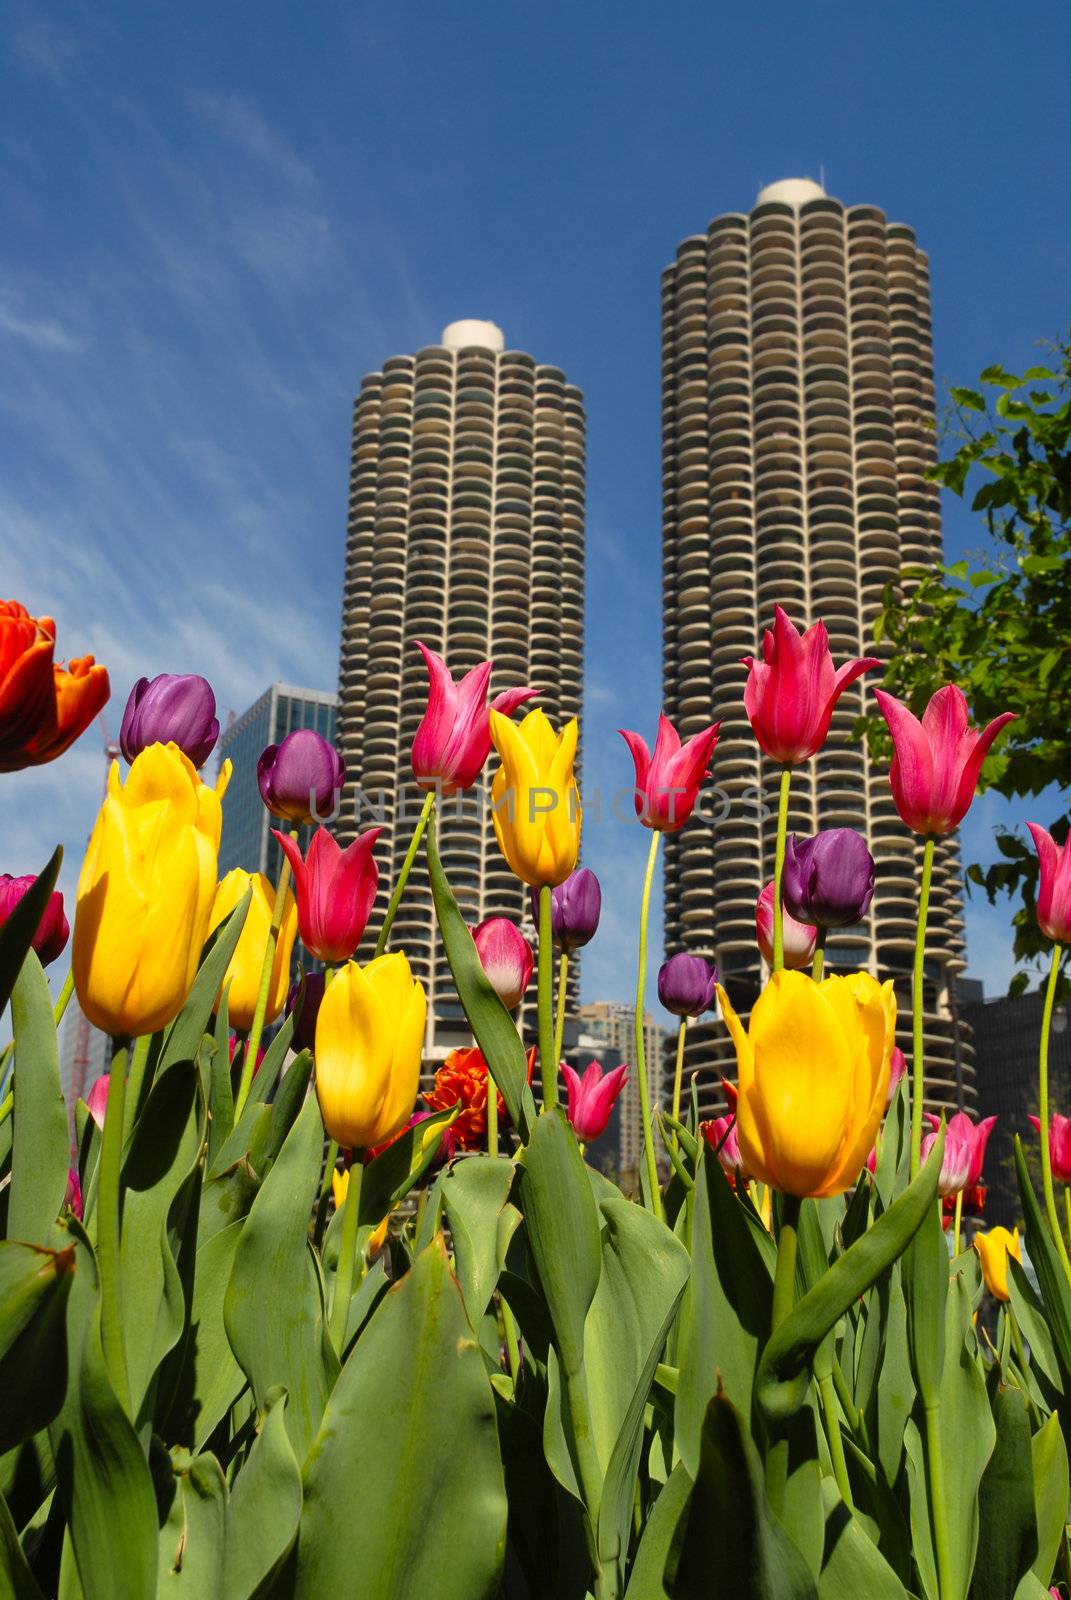 Chicago in Spring by inarts